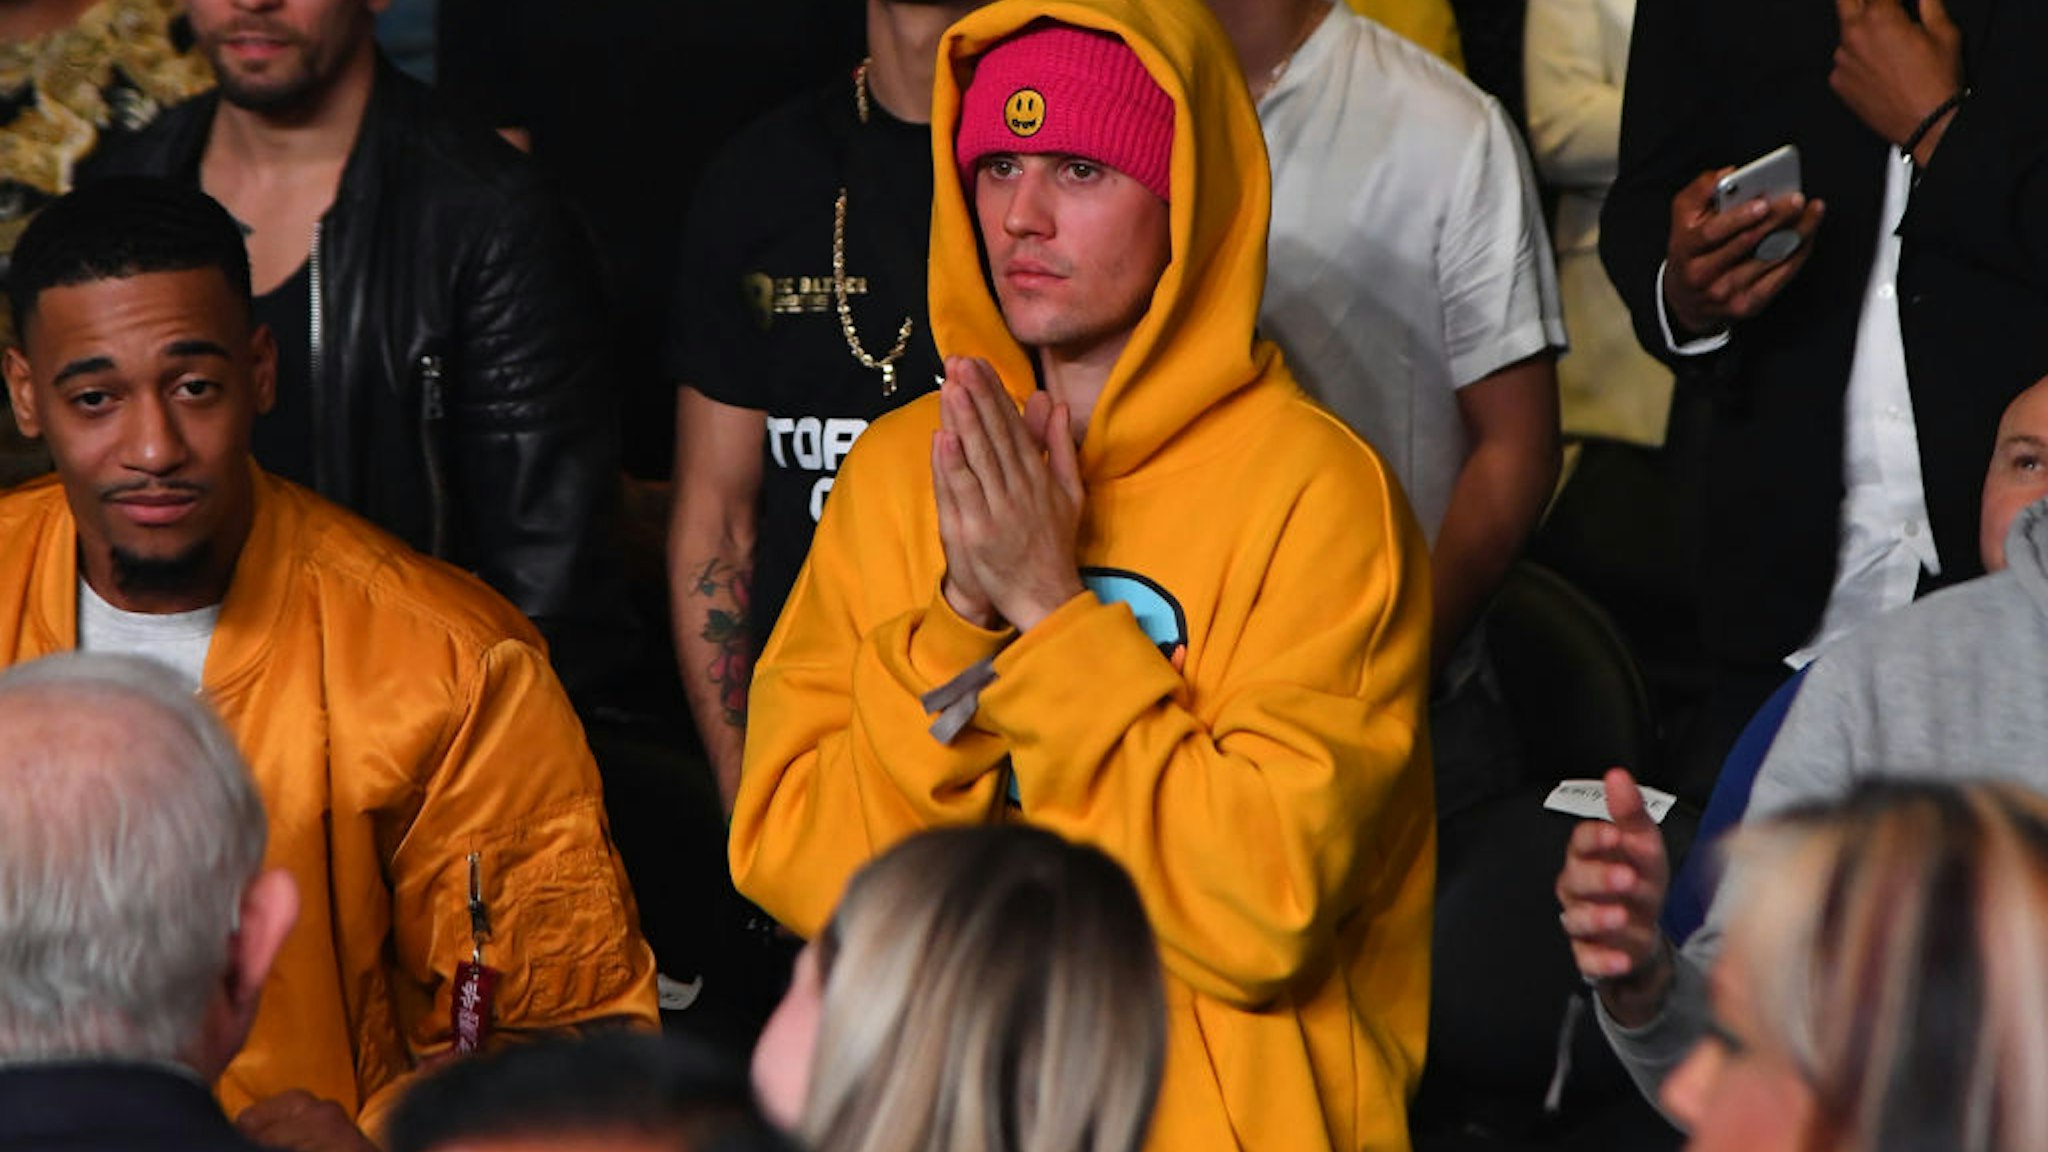 Justin Bieber attends the fight between KSI and Logan Paul at Staples Center on November 9, 2019 in Los Angeles, California.